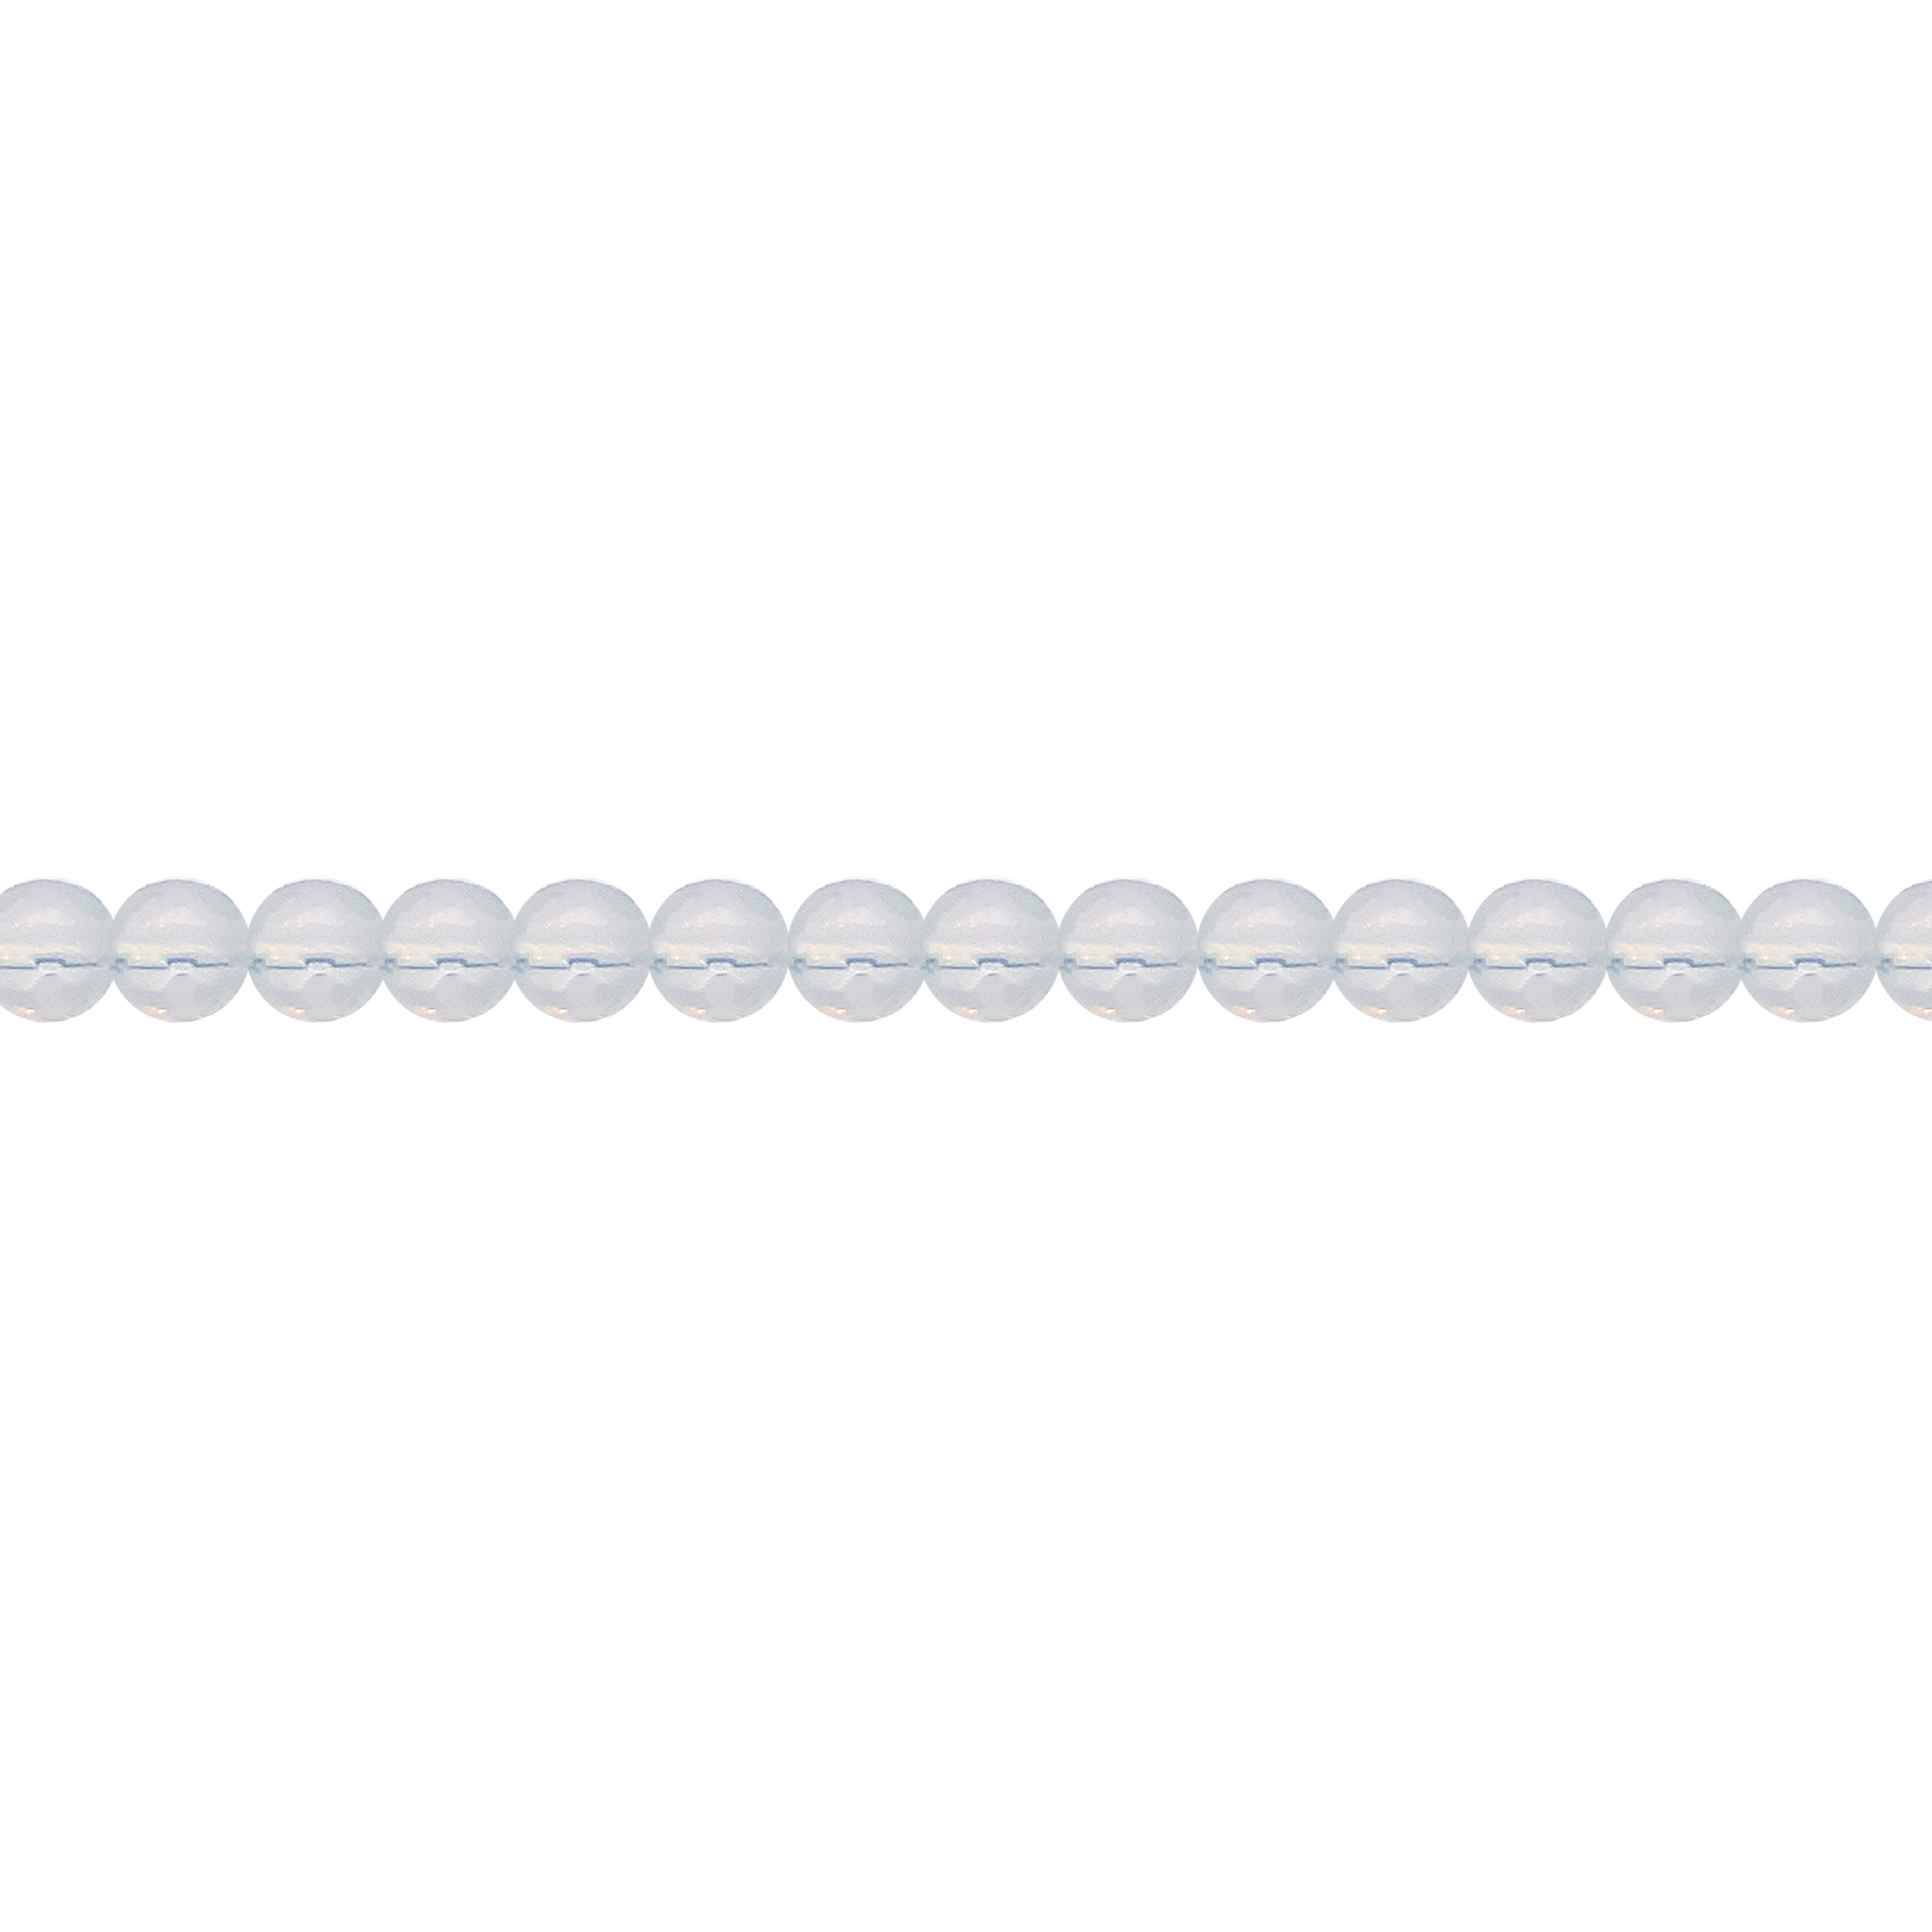 6mm Opalite - Faceted